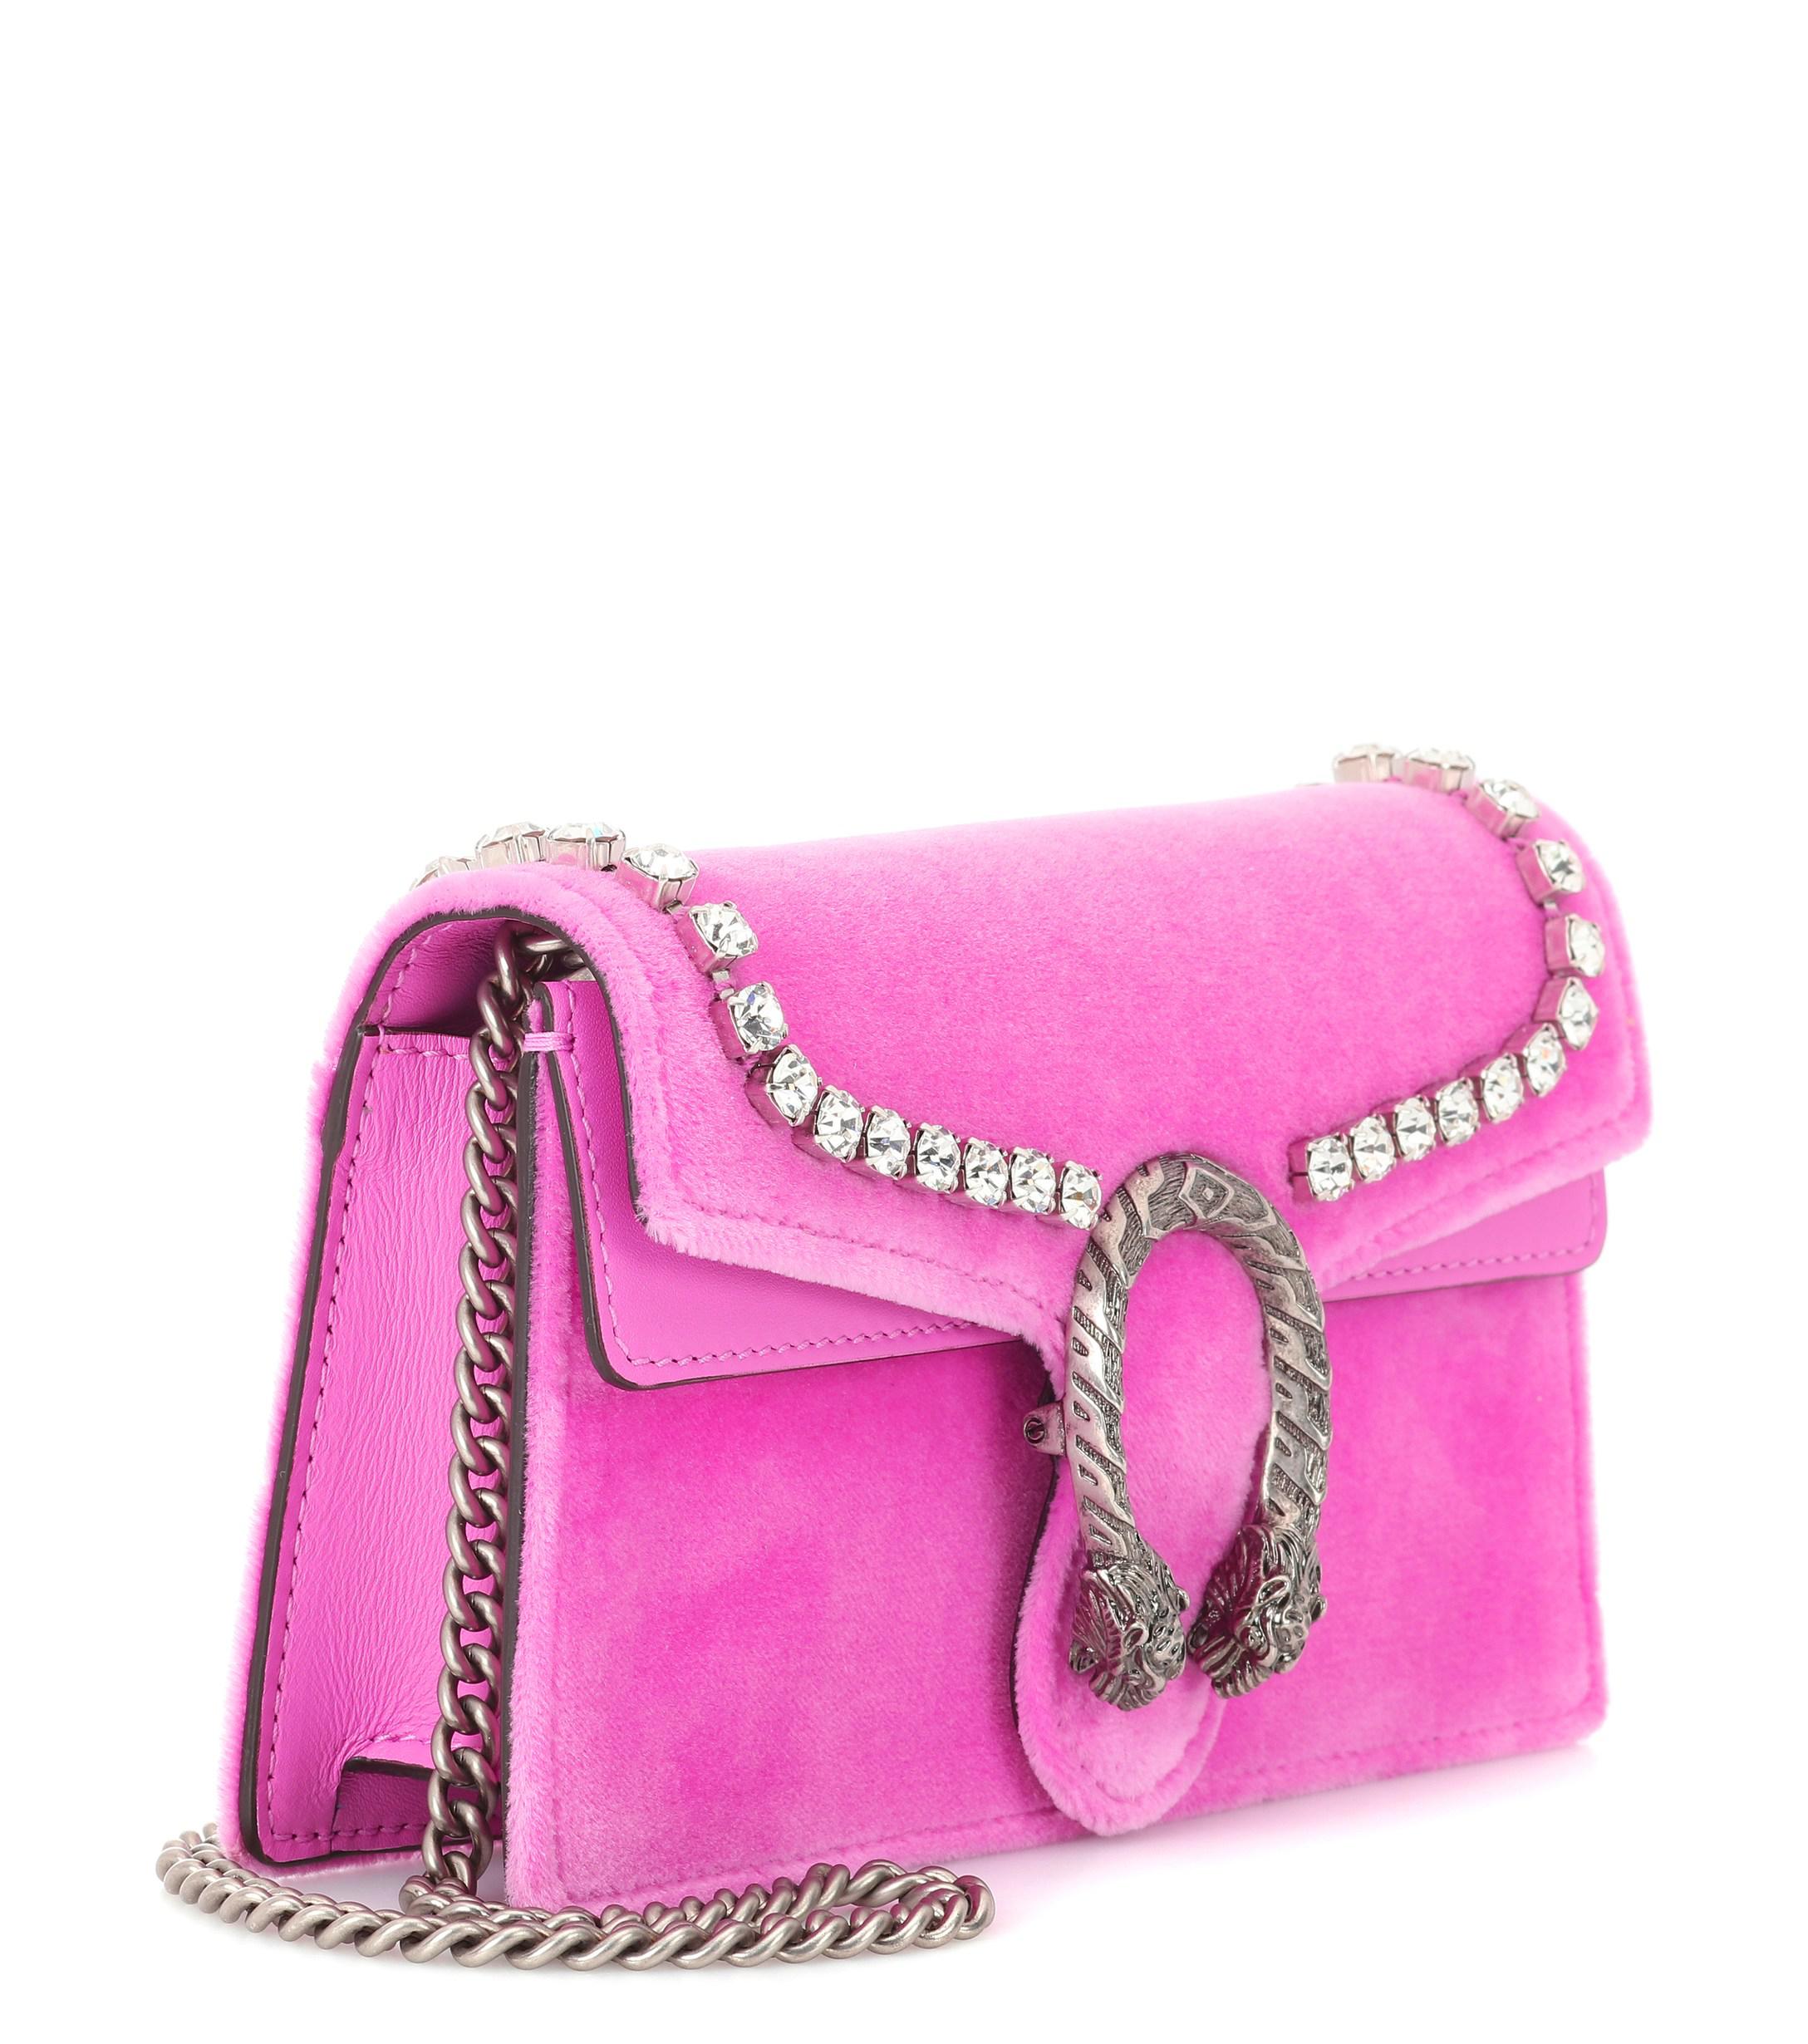 Gucci Dionysus Small Leather Shoulder Bag in Pink